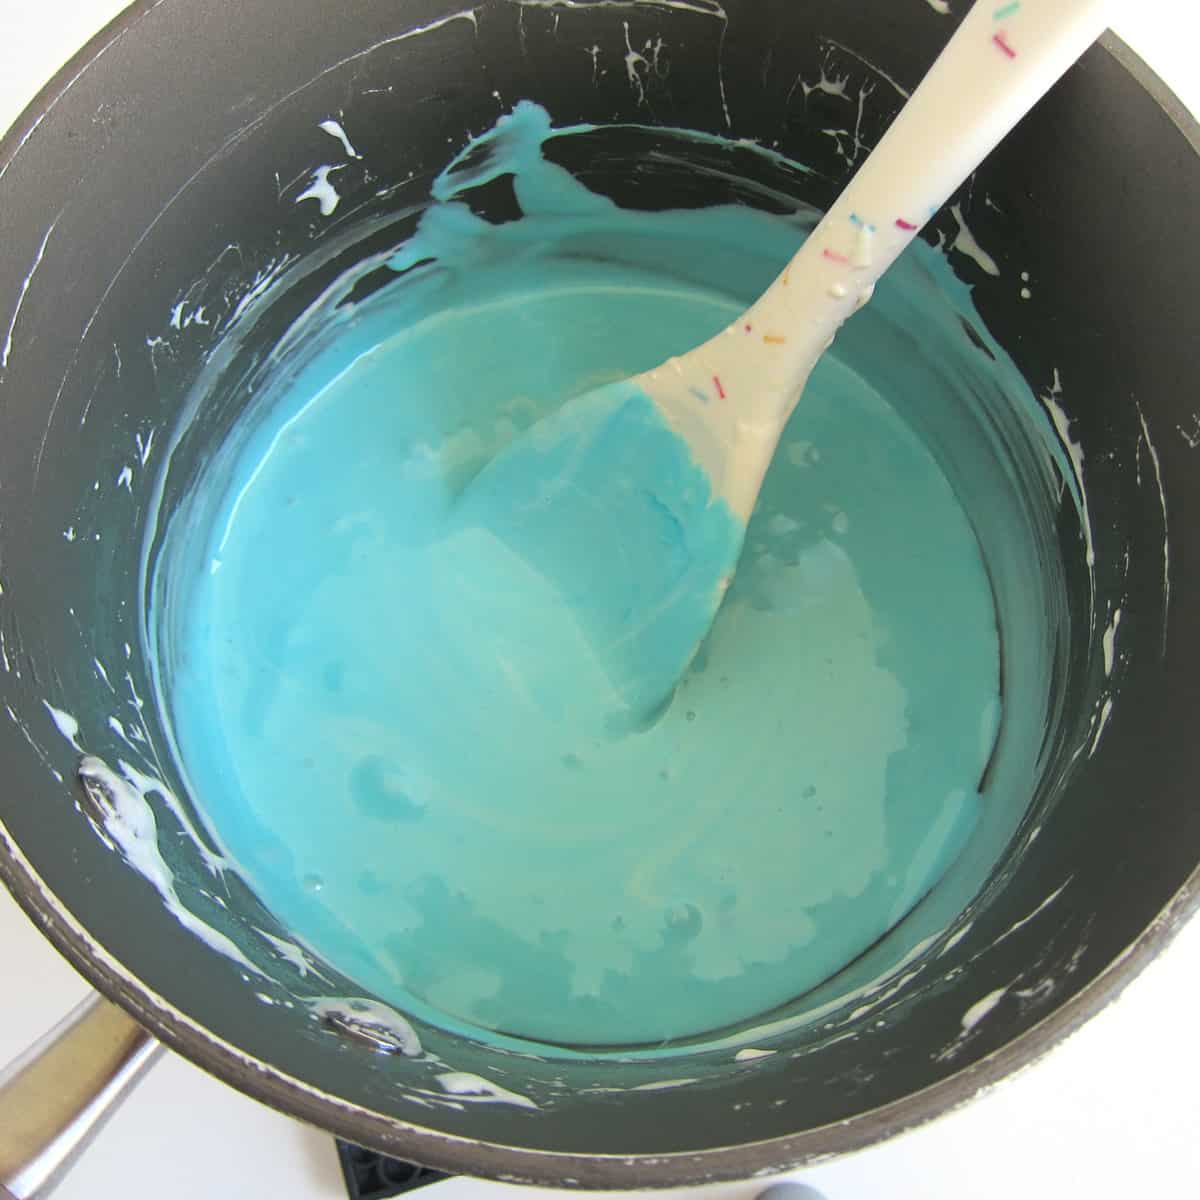 melted butter and marshmallows colored light blue